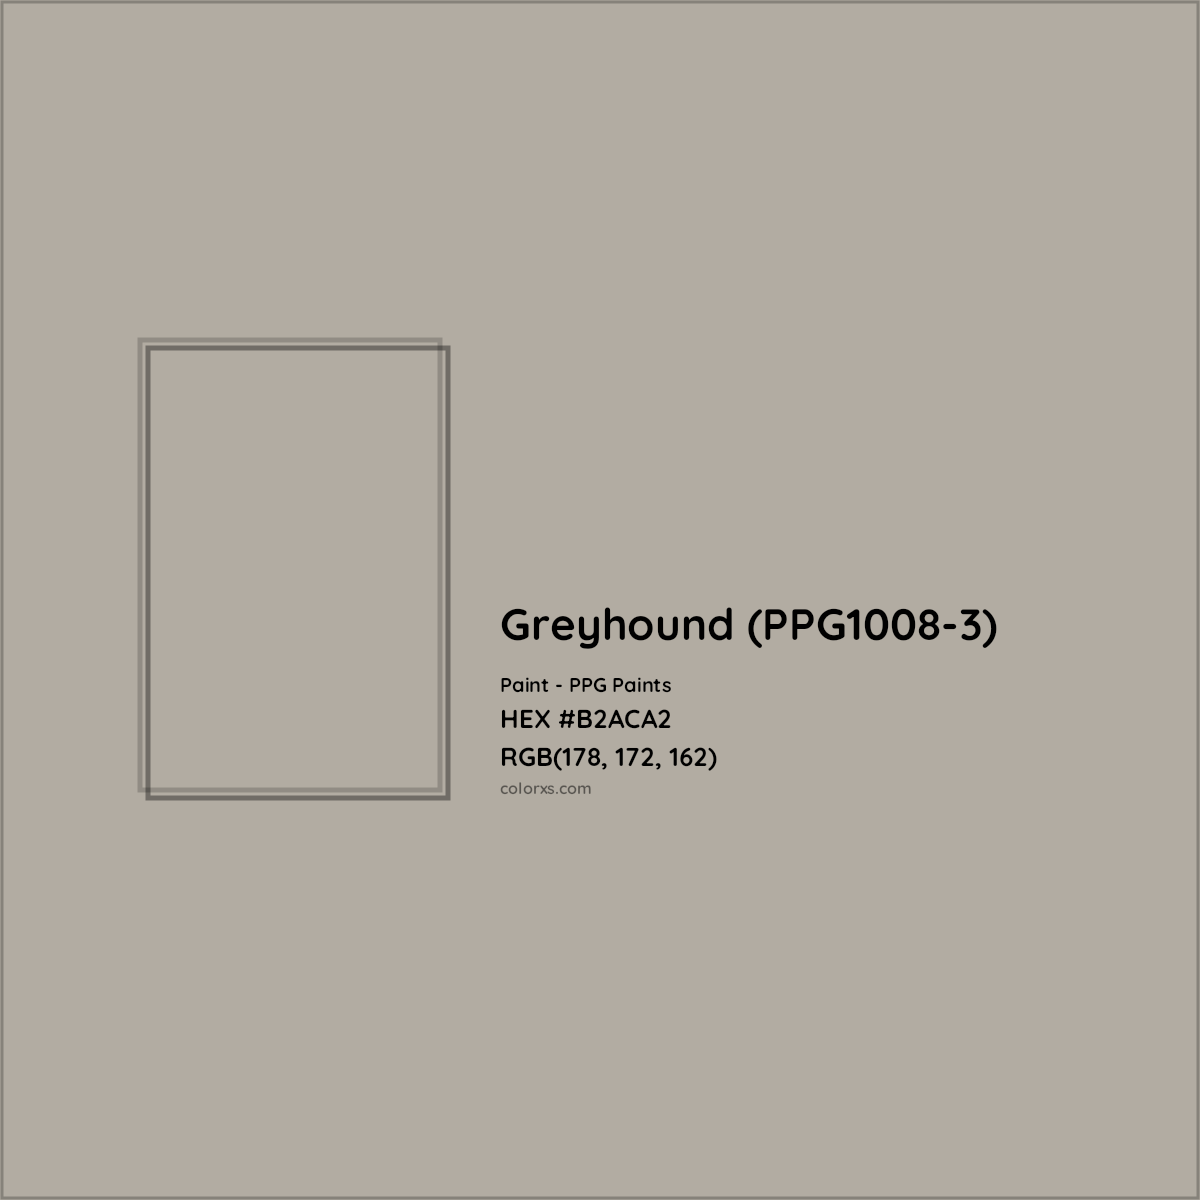 HEX #B2ACA2 Greyhound (PPG1008-3) Paint PPG Paints - Color Code